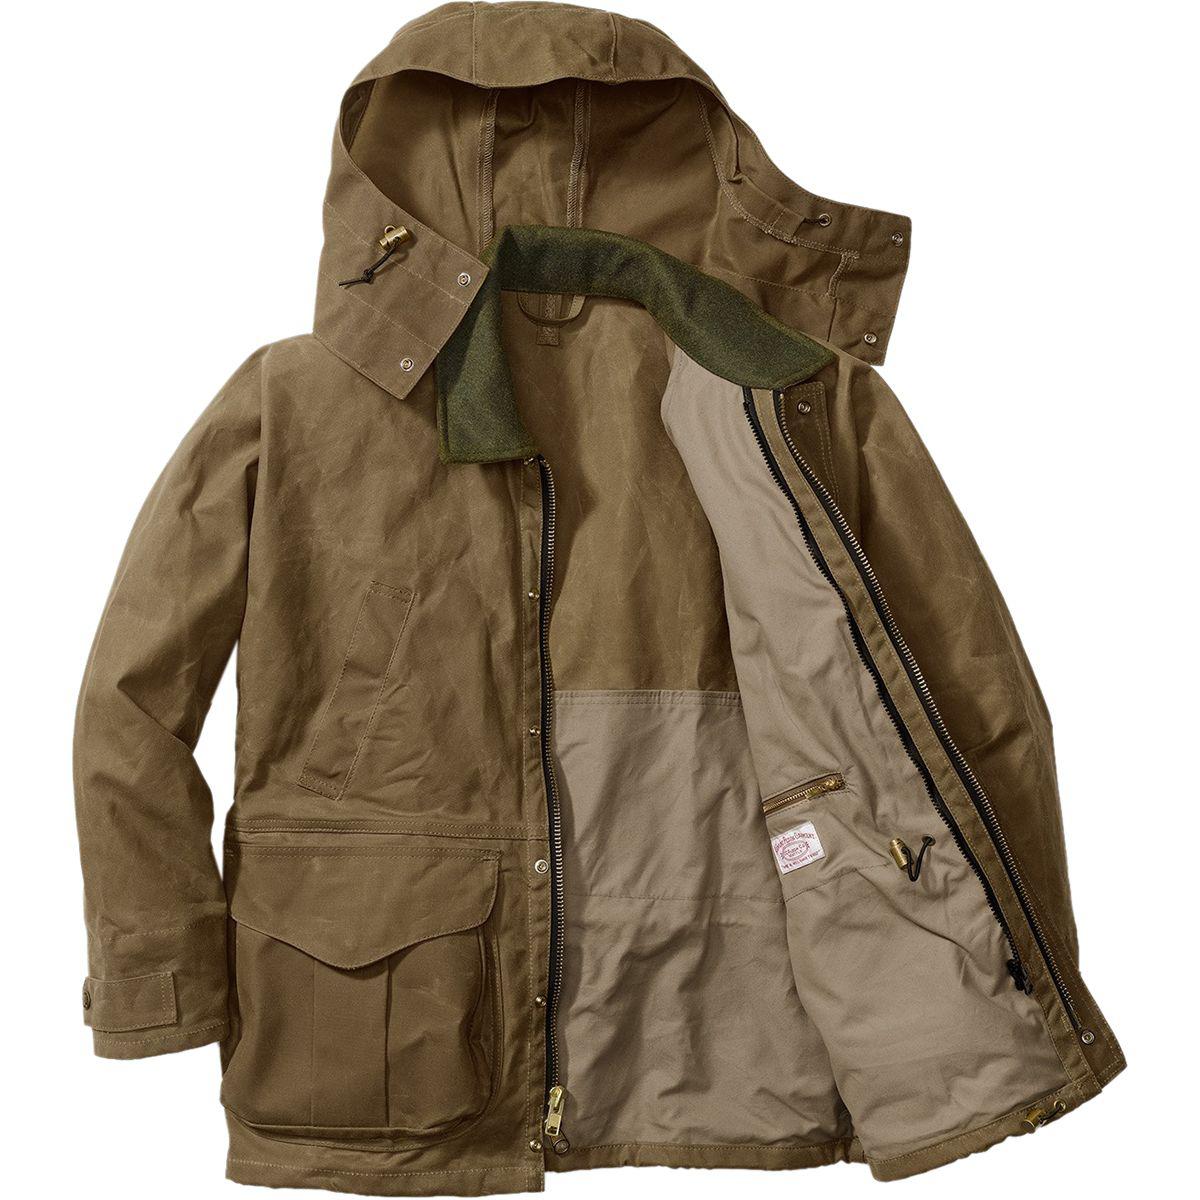 Filson Tin Cloth Field Jacket in Brown for Men - Lyst